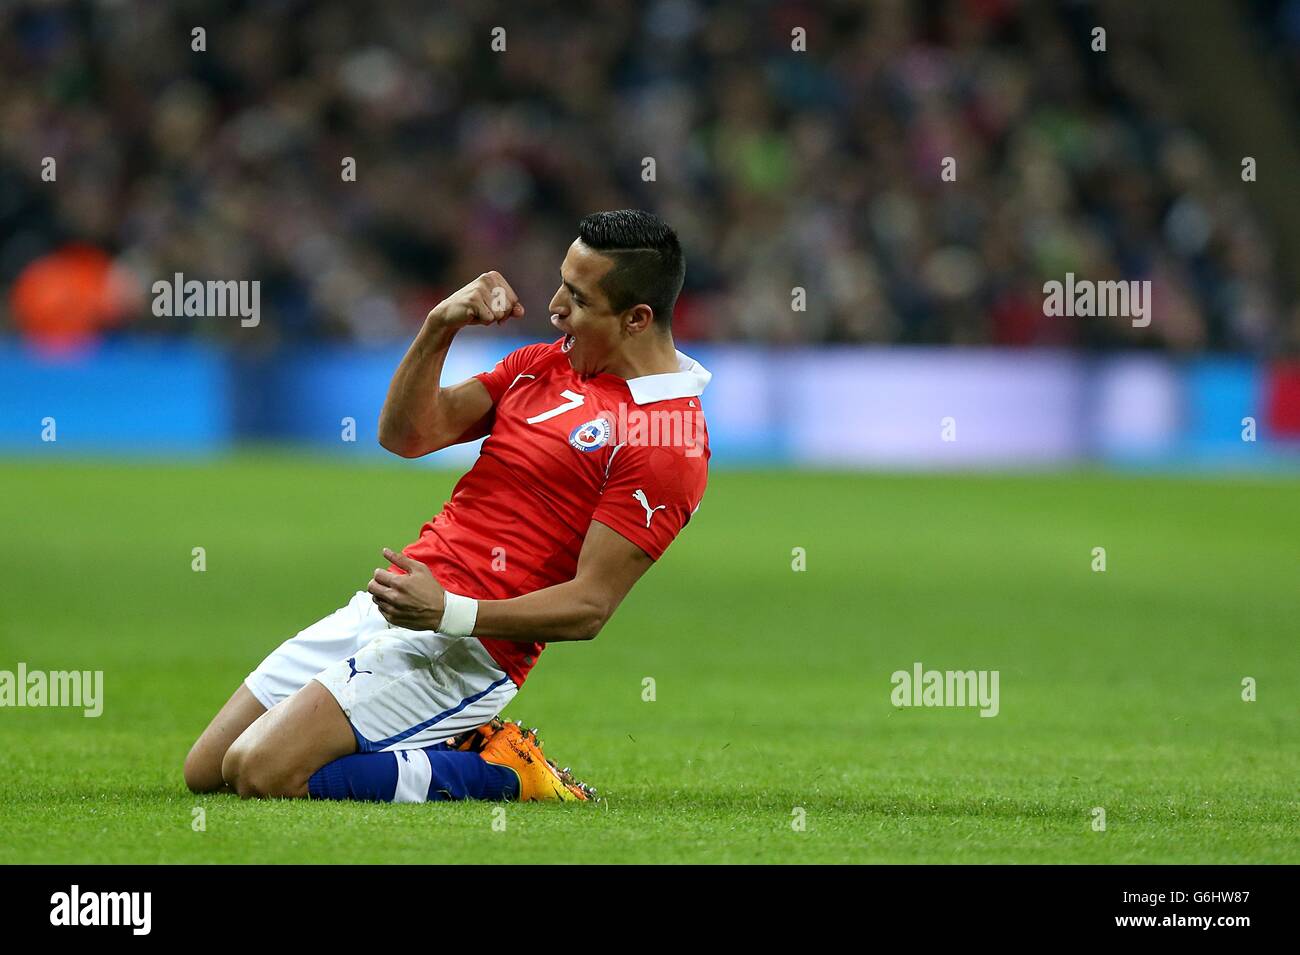 Soccer - International Friendly - England v Chile - Wembley Stadium. Chile's Sanchez Alexis celebrates scoring their first goal of the game Stock Photo